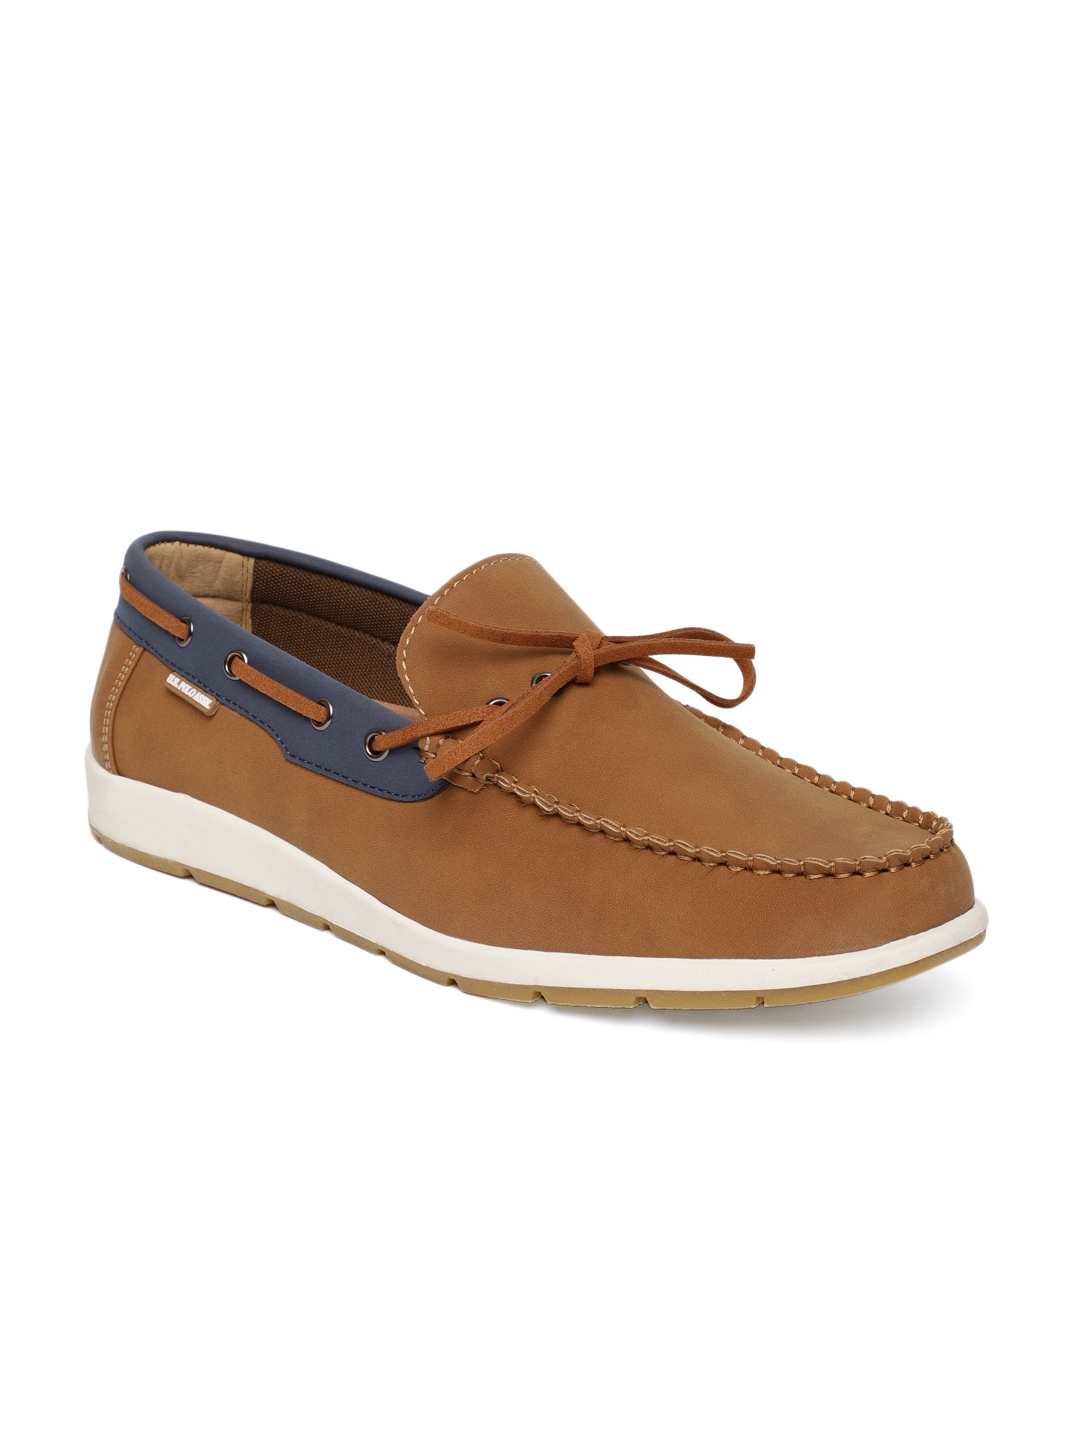 Polo Ralph Lauren Brown Suede Boat Shoes